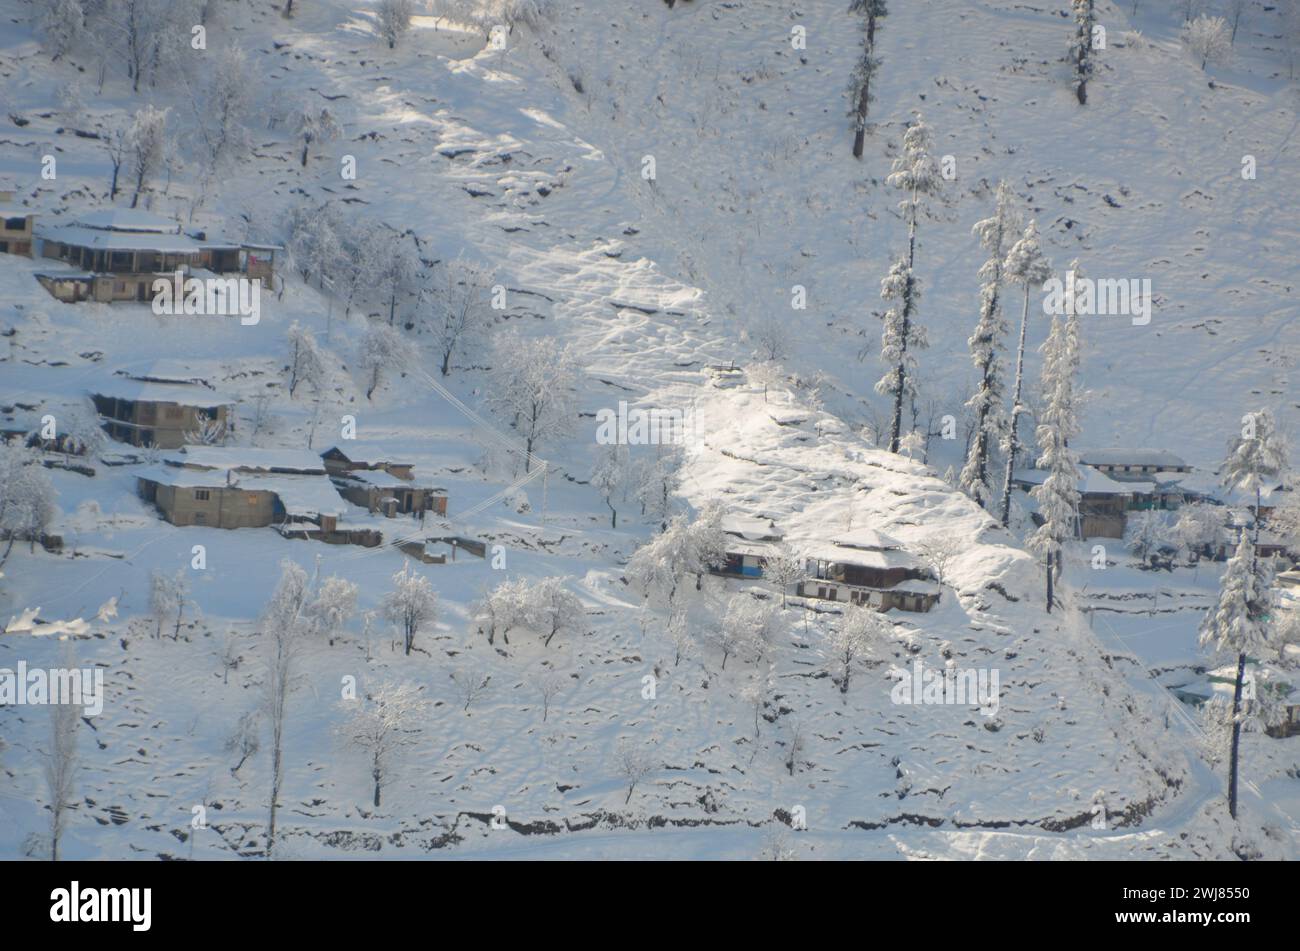 sunny day after heavy snow fall in naran kaghan images Stock Photo